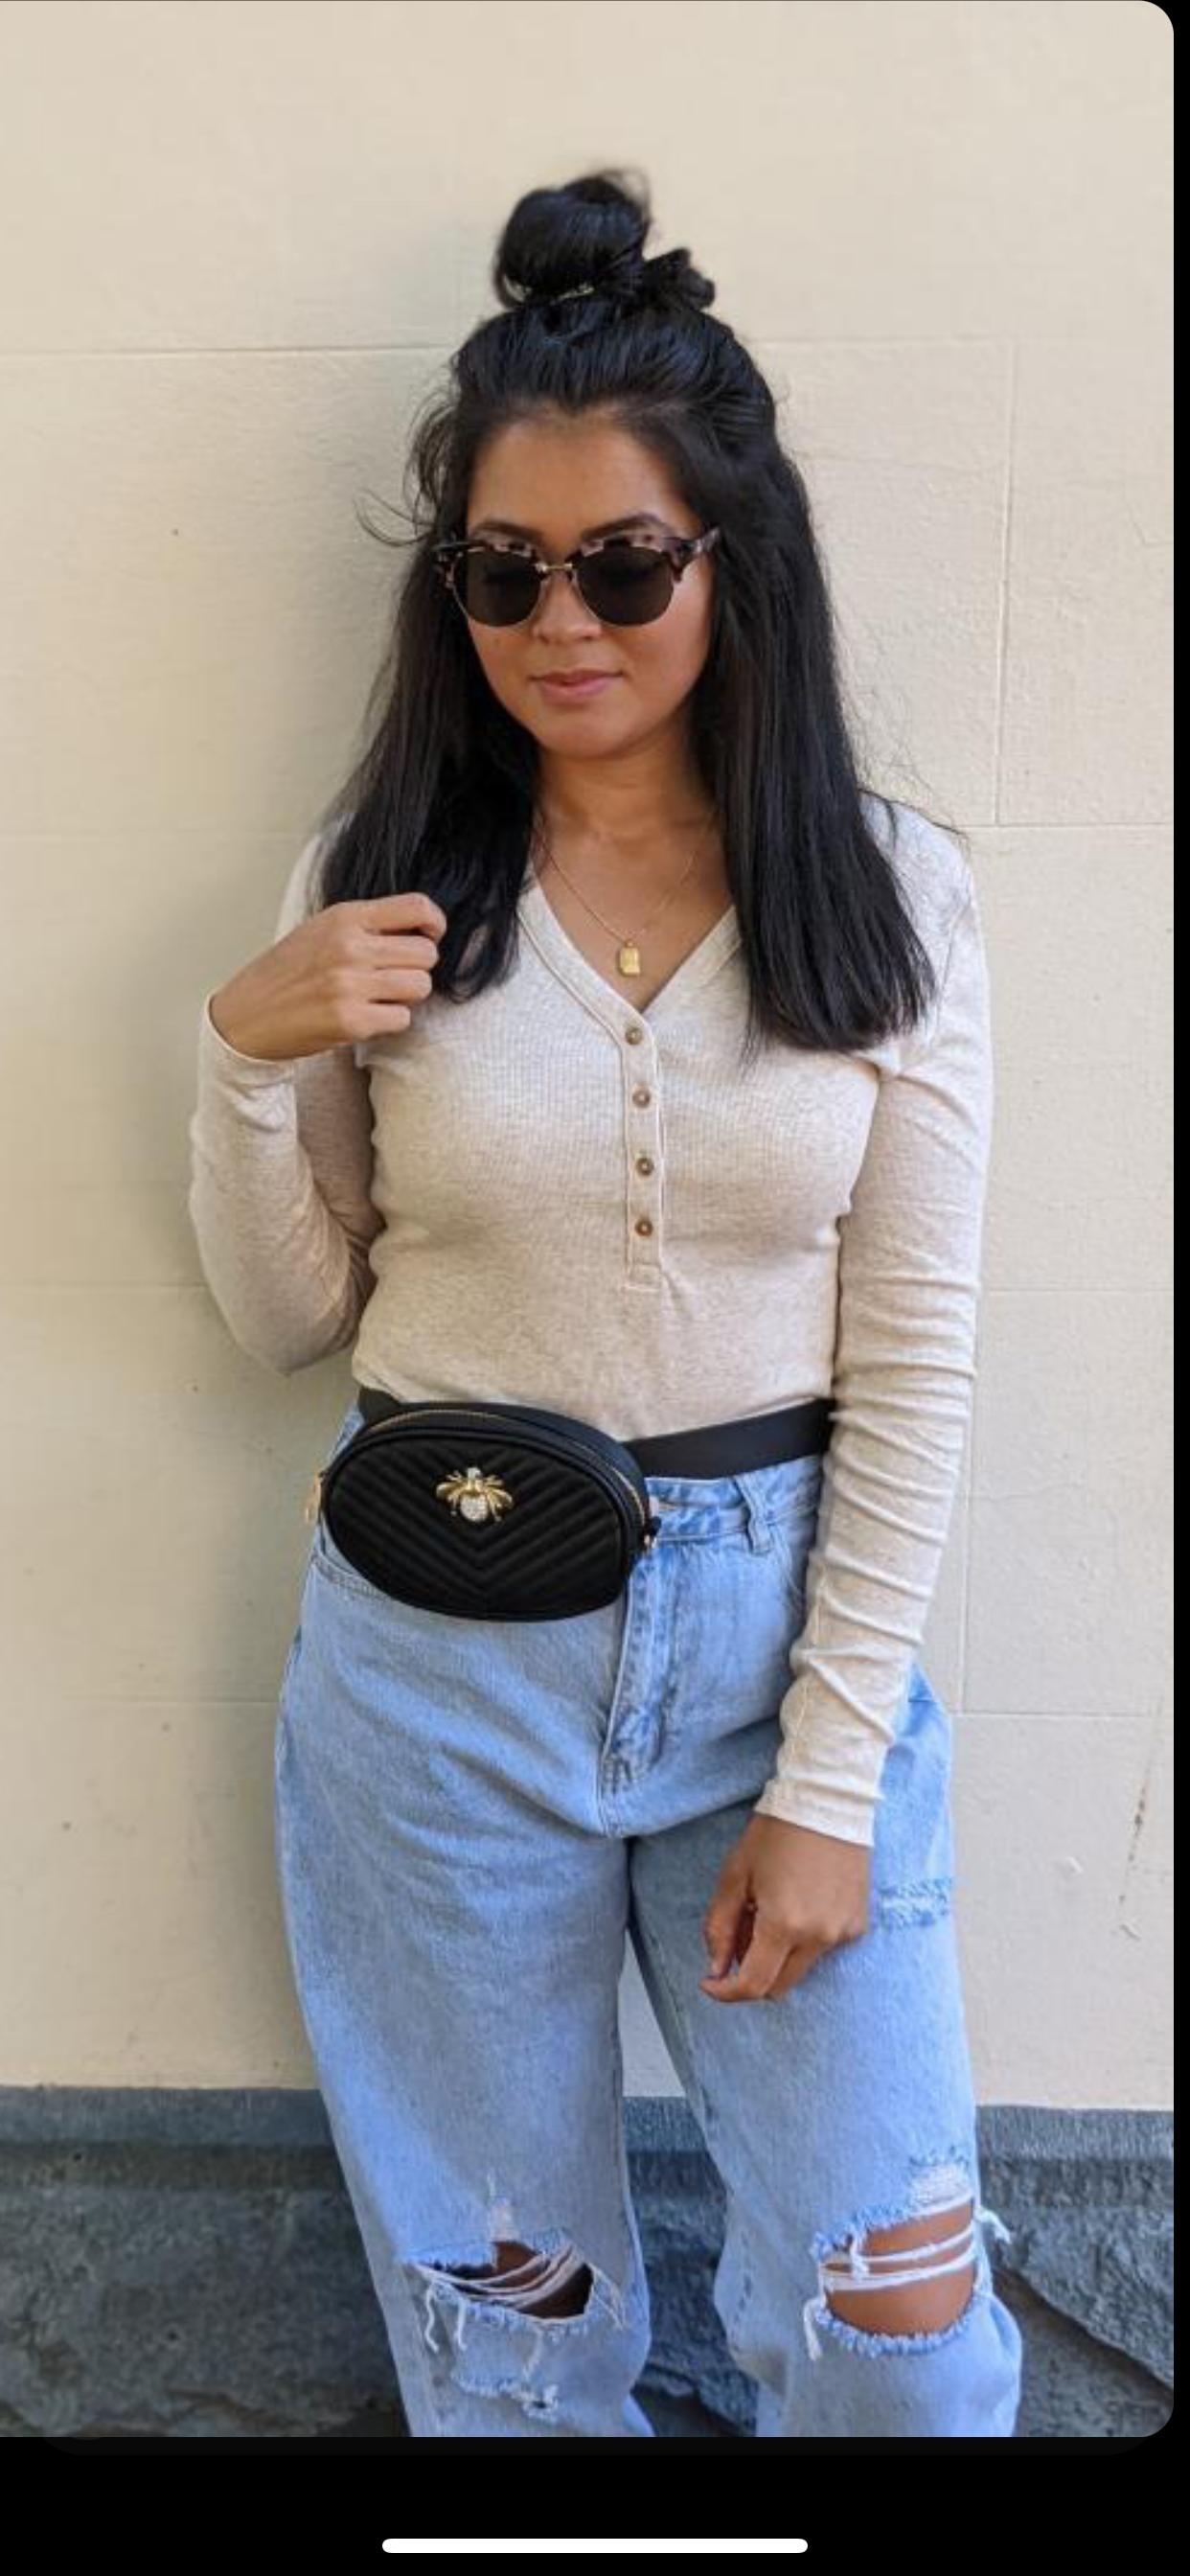 Multitasker - 6 ways to wear belt bag/bag with a choice of bee embellishments